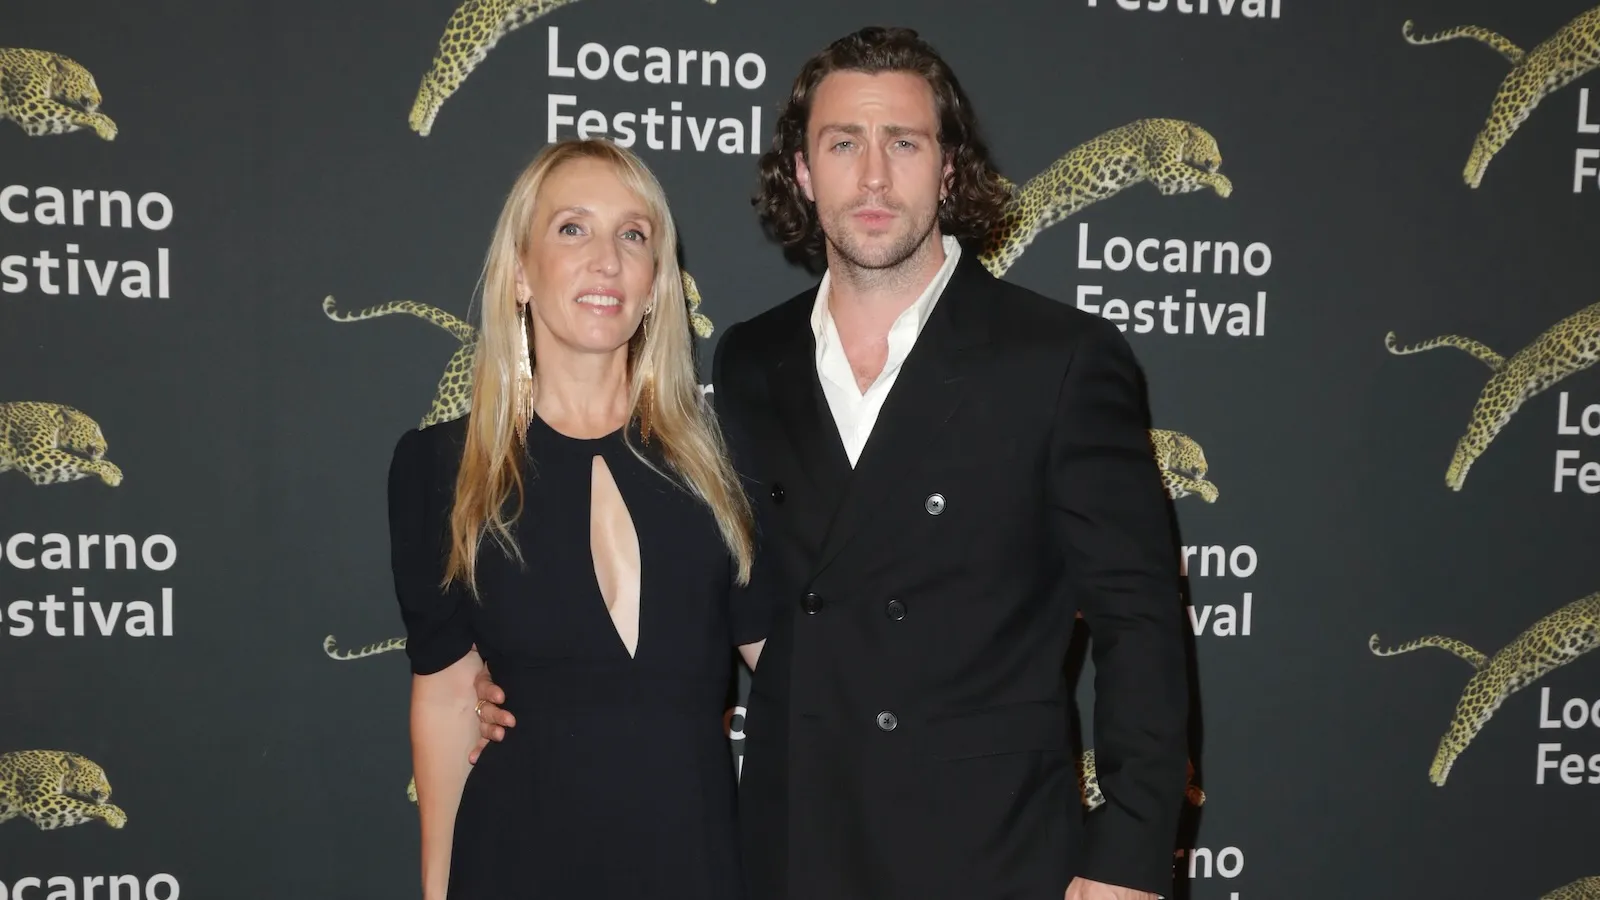 Sam Taylor-Johnson and Aaron Taylor-Johnson attend the 75th Locarno Film Festival red carpet on August 03, 2022 in Locarno, Switzerland.